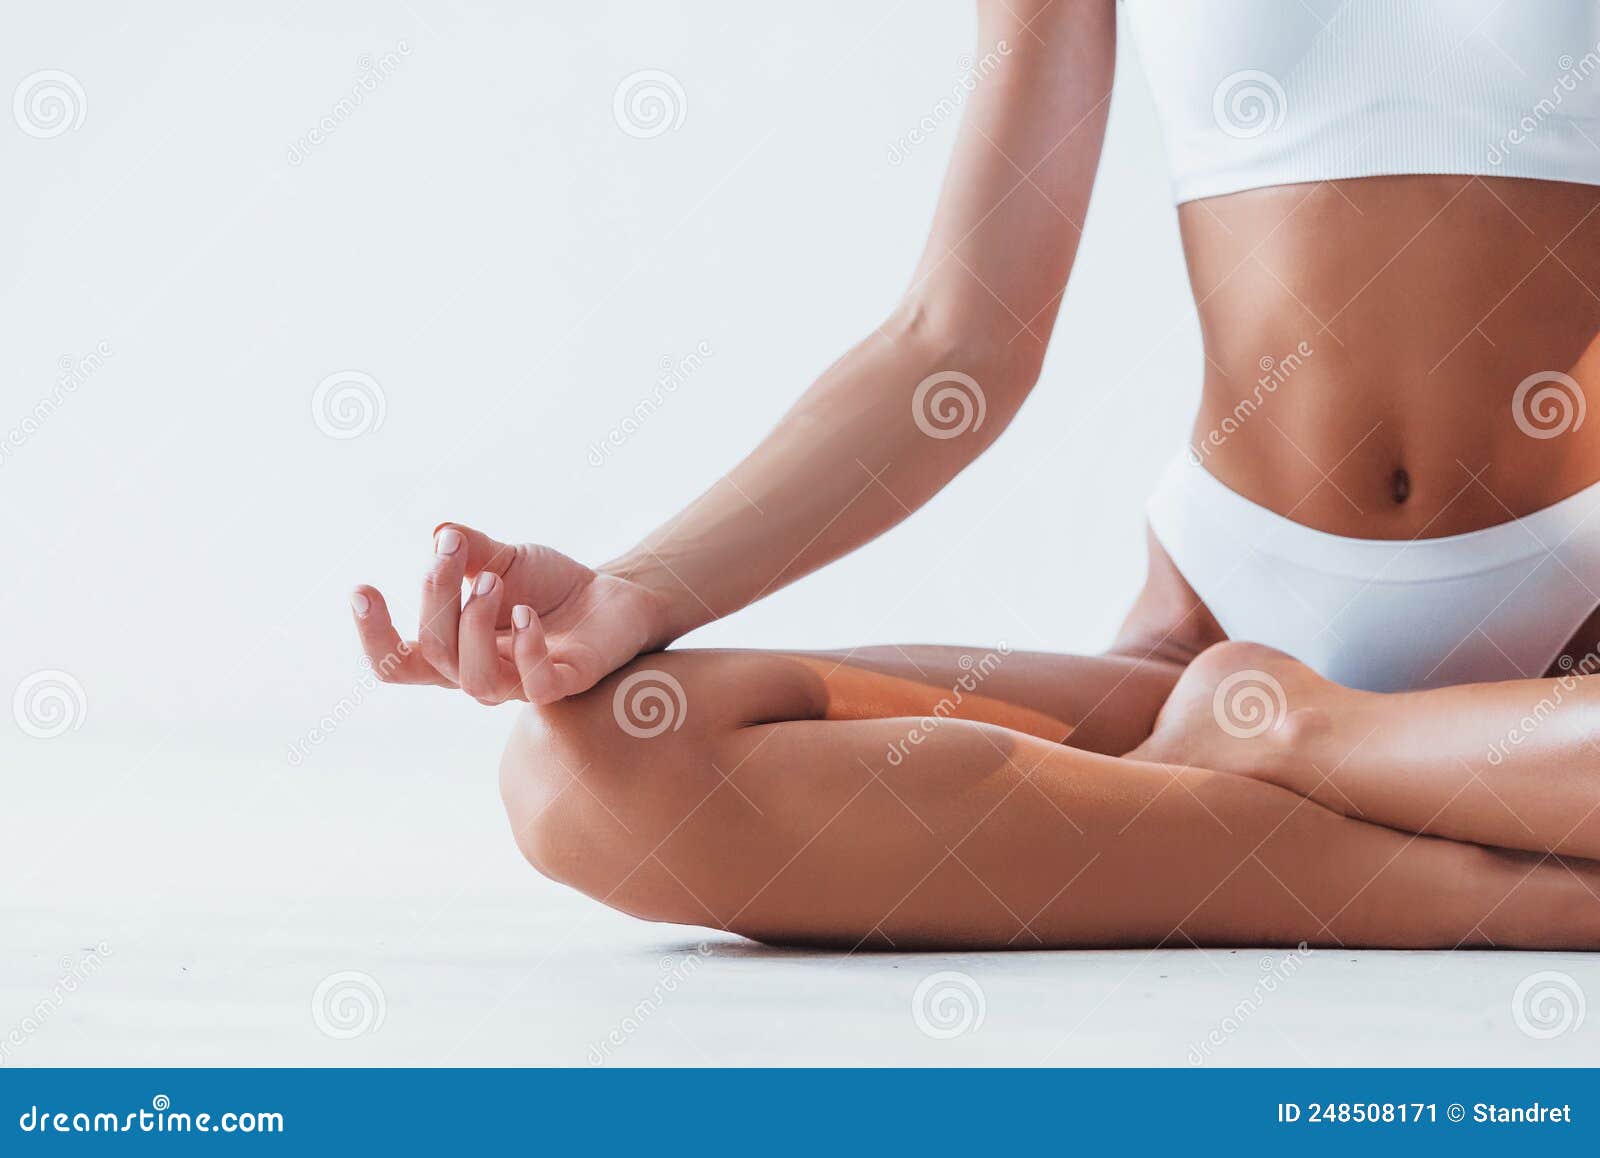 Young Girl Doing Exercises Underwear On Stock Photo 1028889199